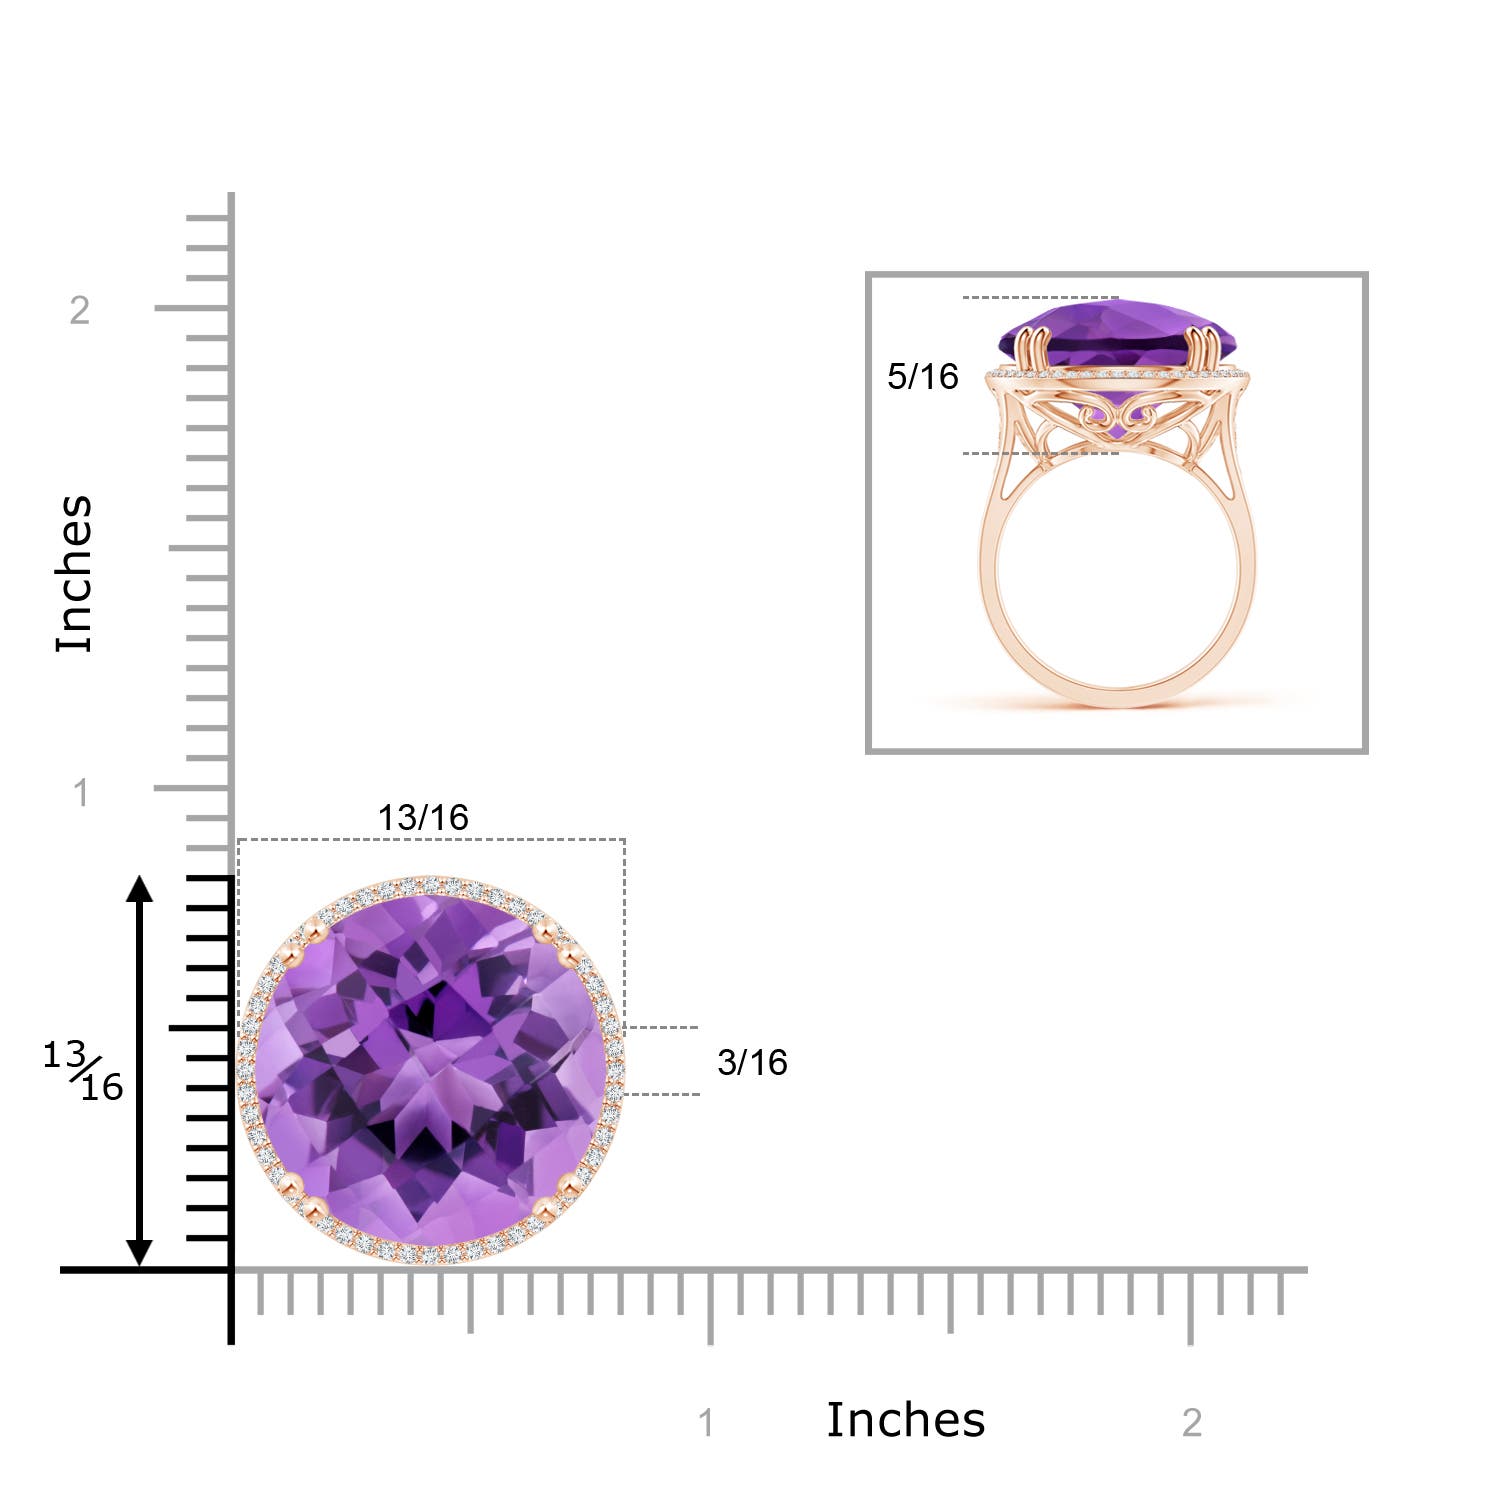 AA - Amethyst / 21.26 CT / 14 KT Rose Gold